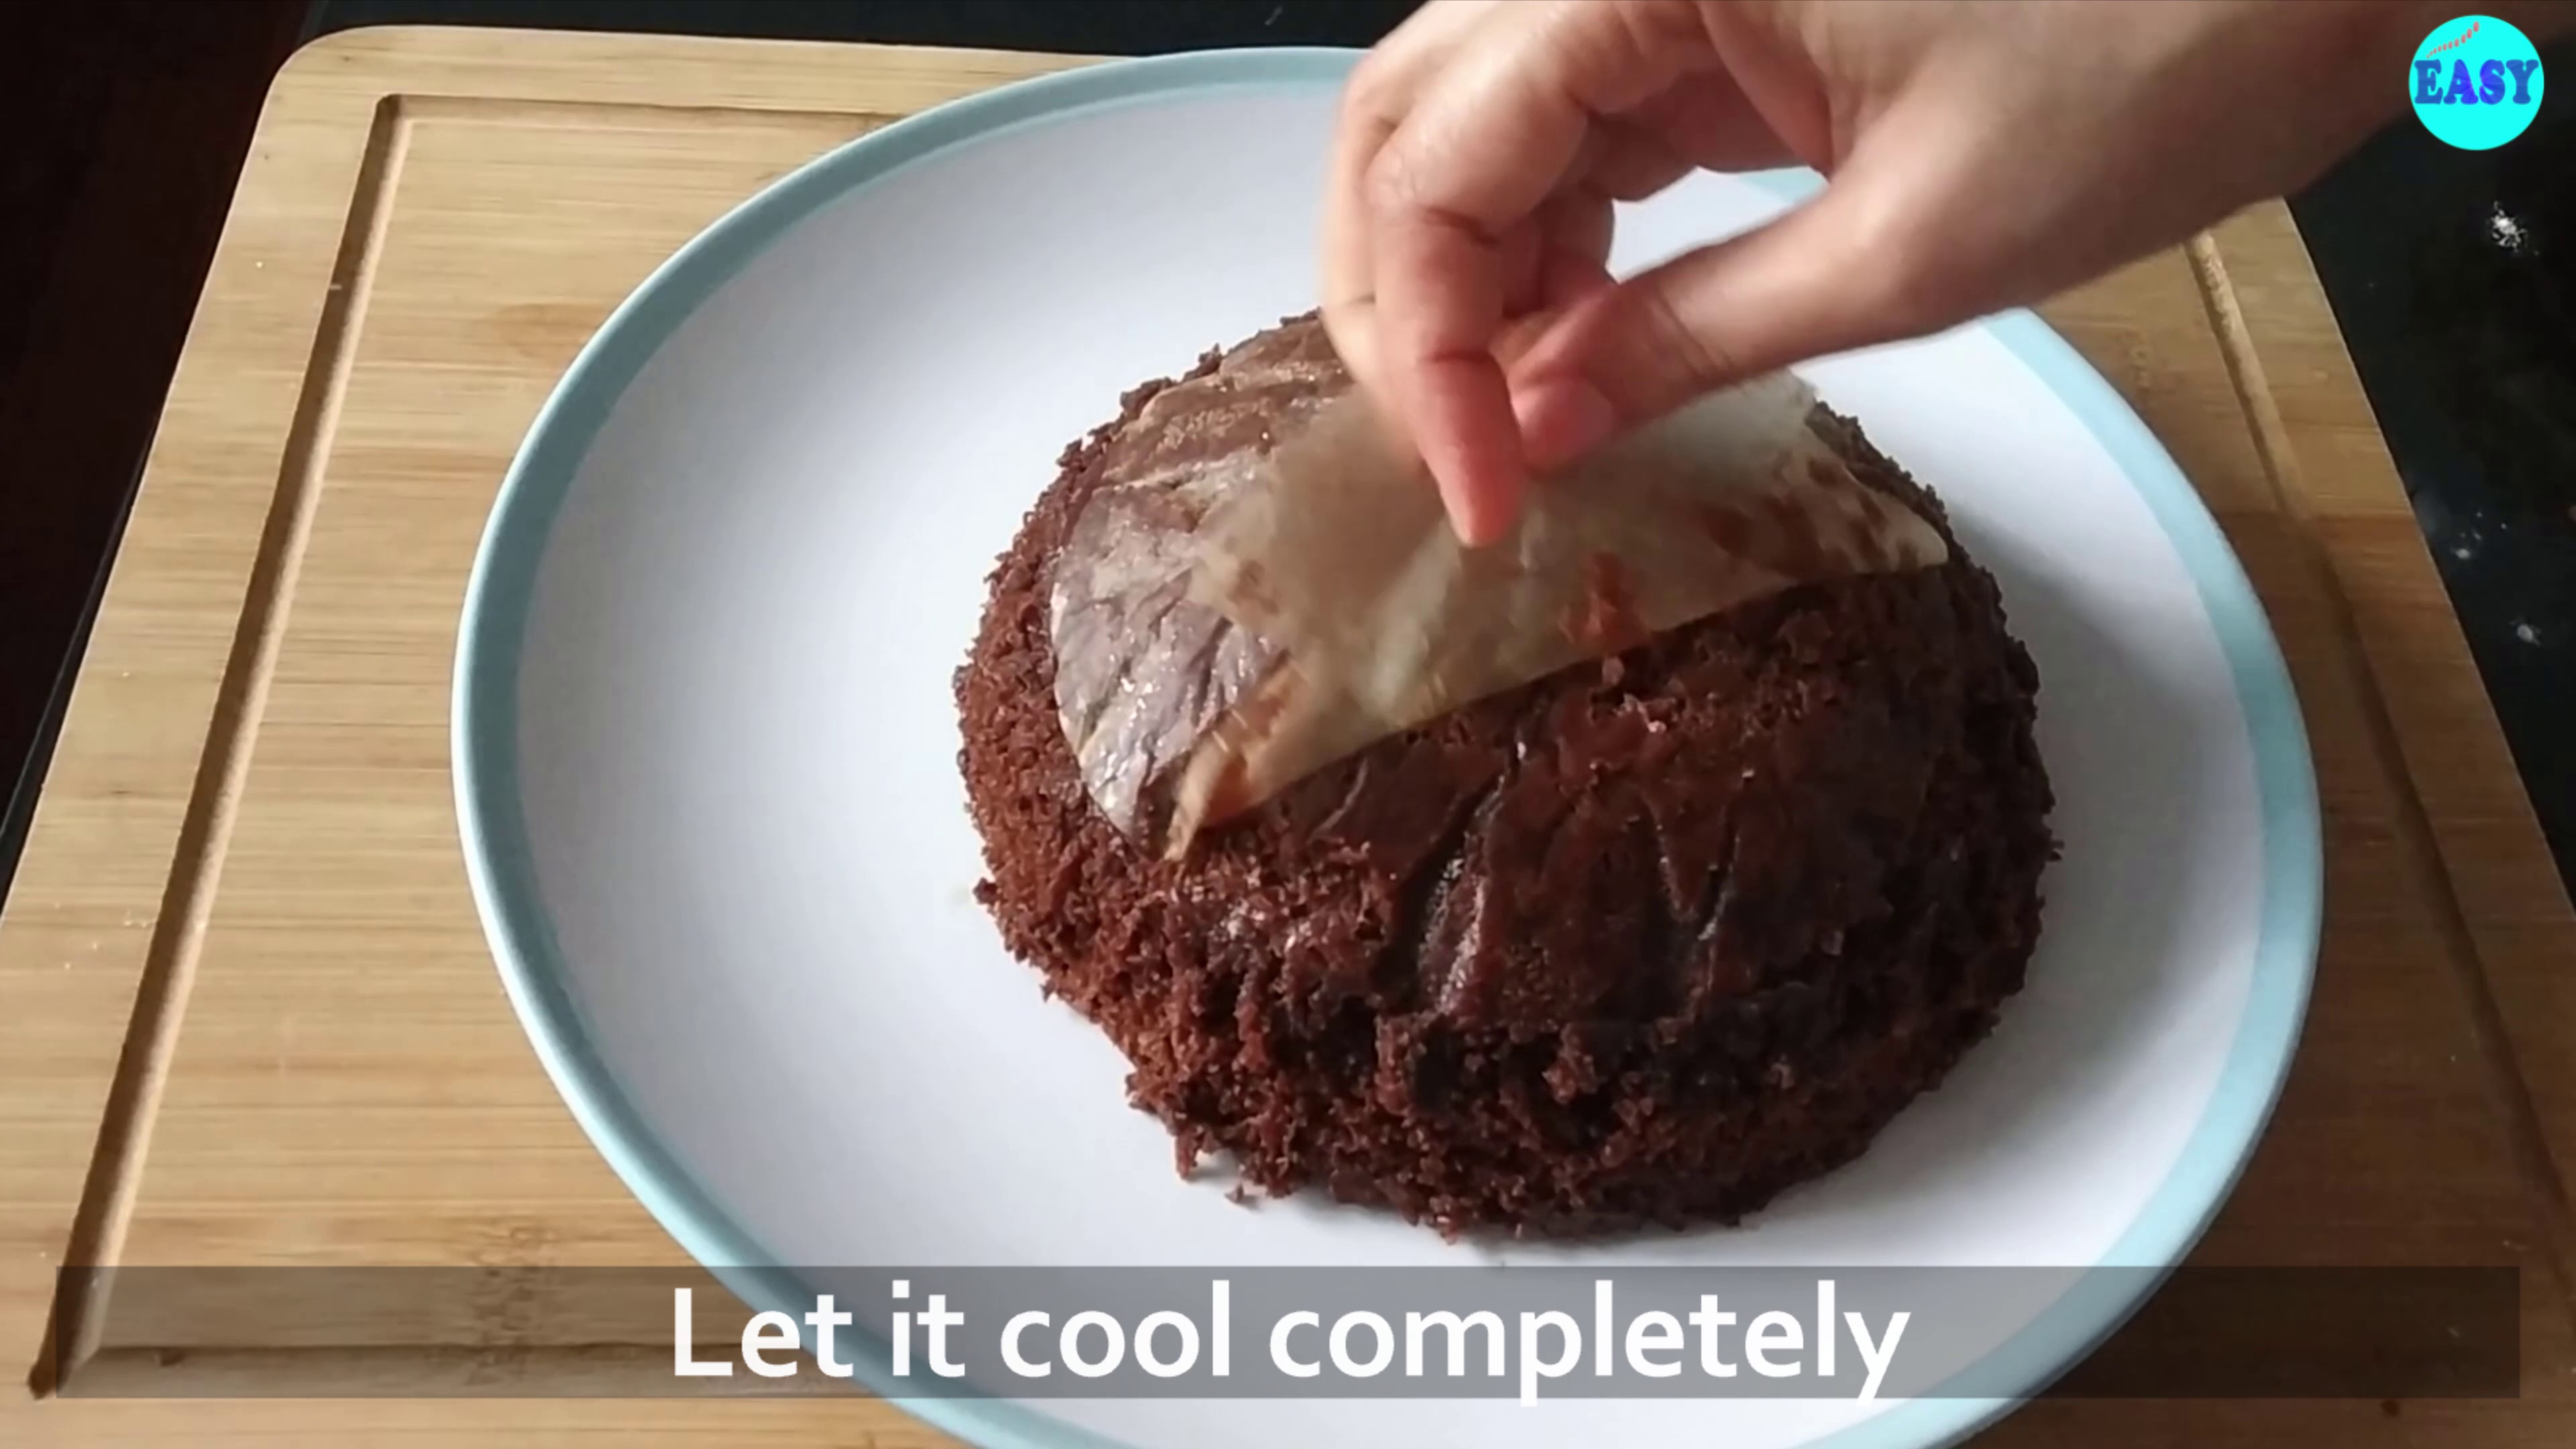 Step 10 - Then unmould it, remove the butter paper and let it cool completely before icing.